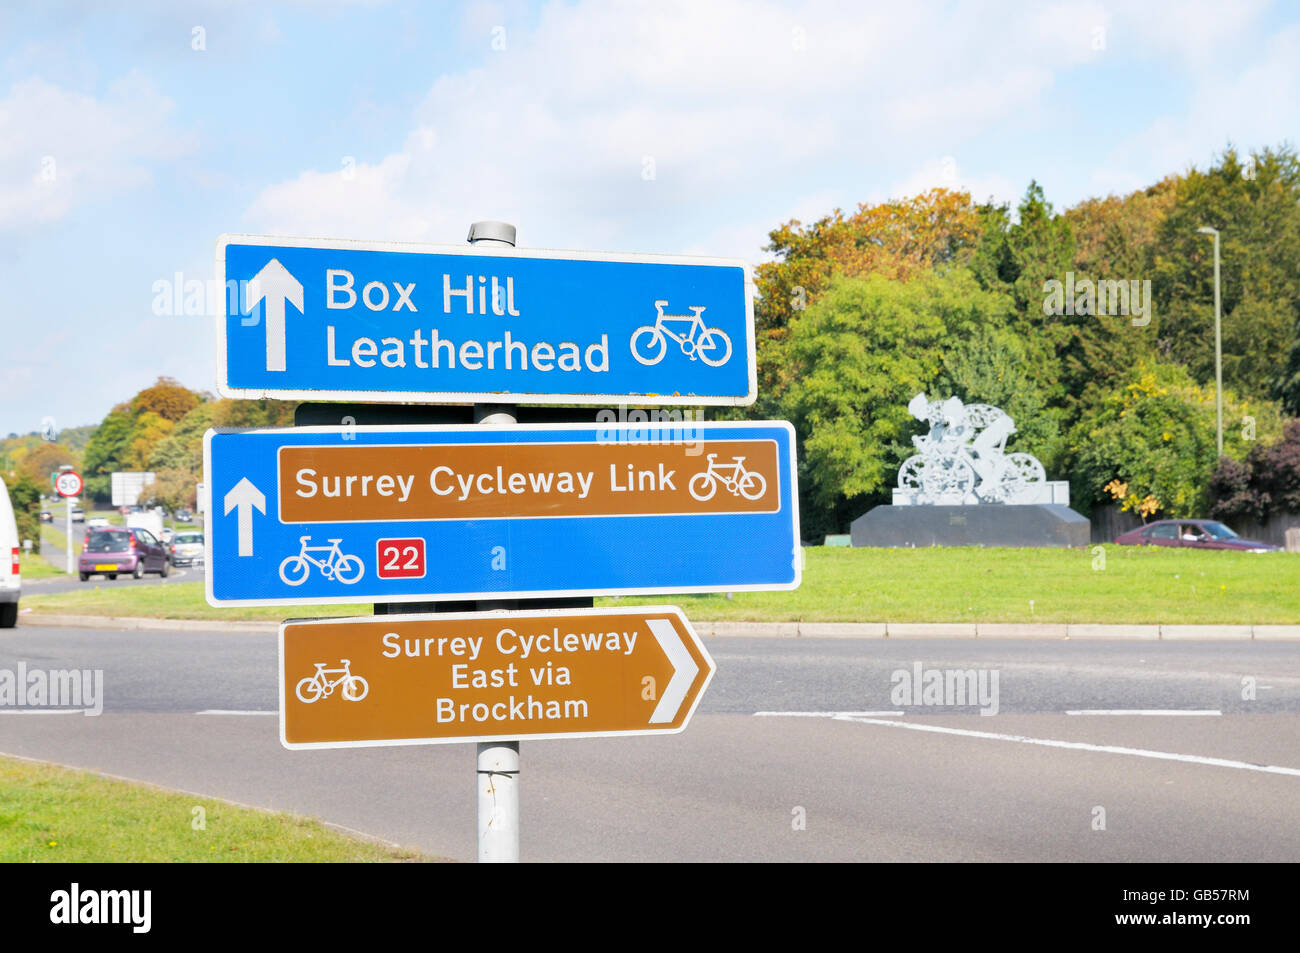 Roads signs for Surrey Cycleway Link on the A24 London Road, Dorking, Surrey, England, UK Stock Photo